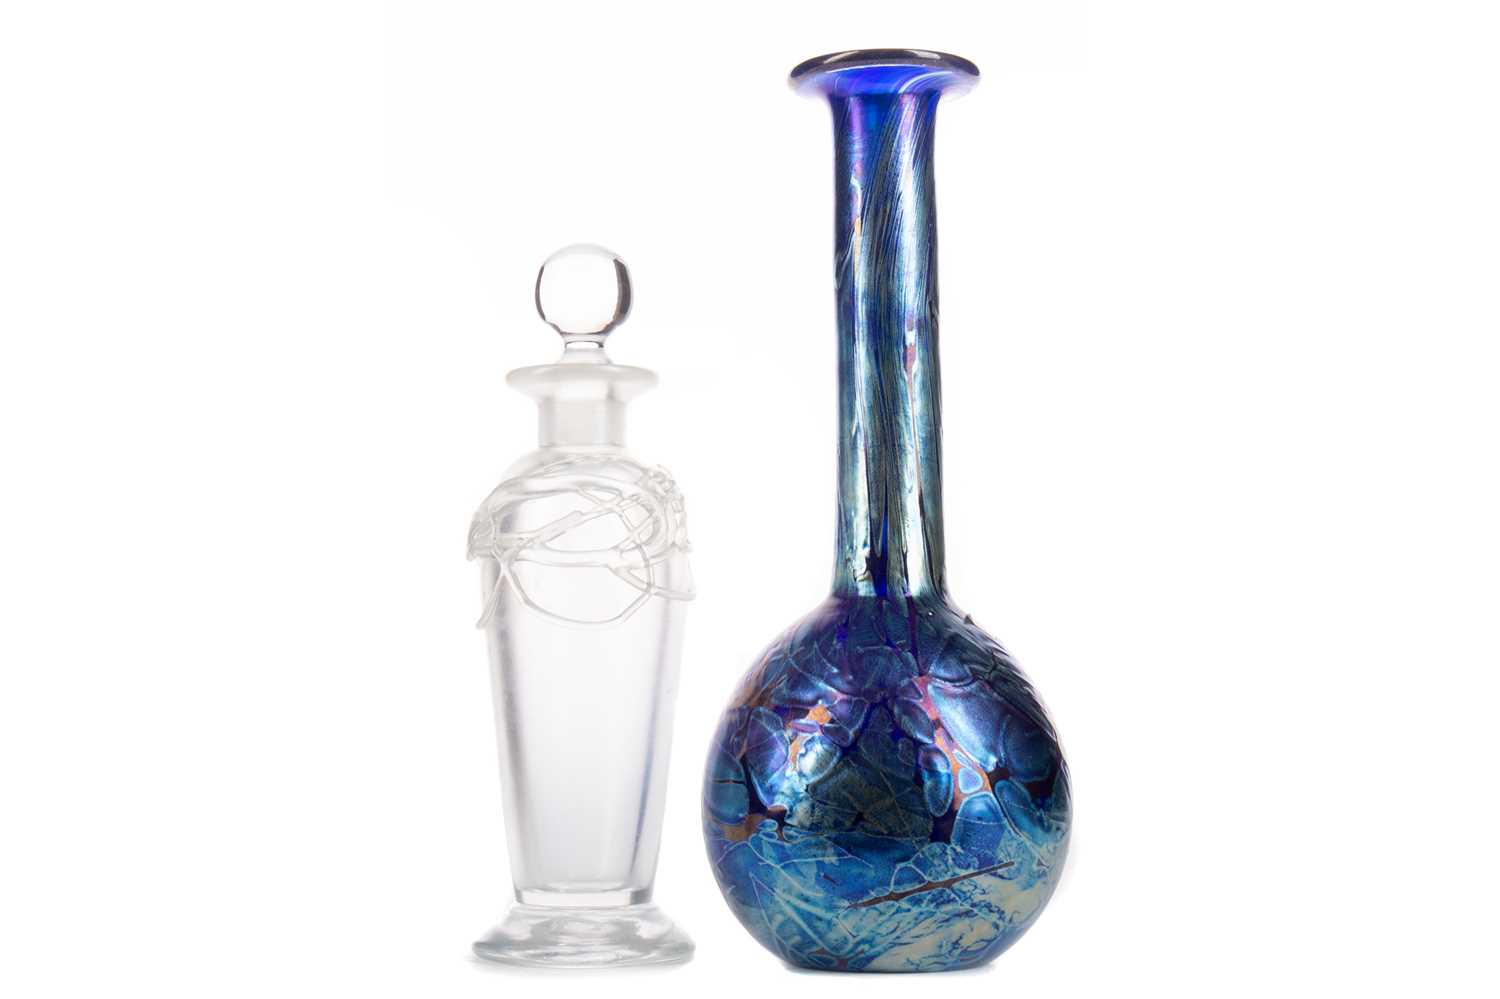 Lot 266 - A GOZO IRRIDESCENT GLASS VASE AND PERFUME BOTTLE BY DAVID WALLACE